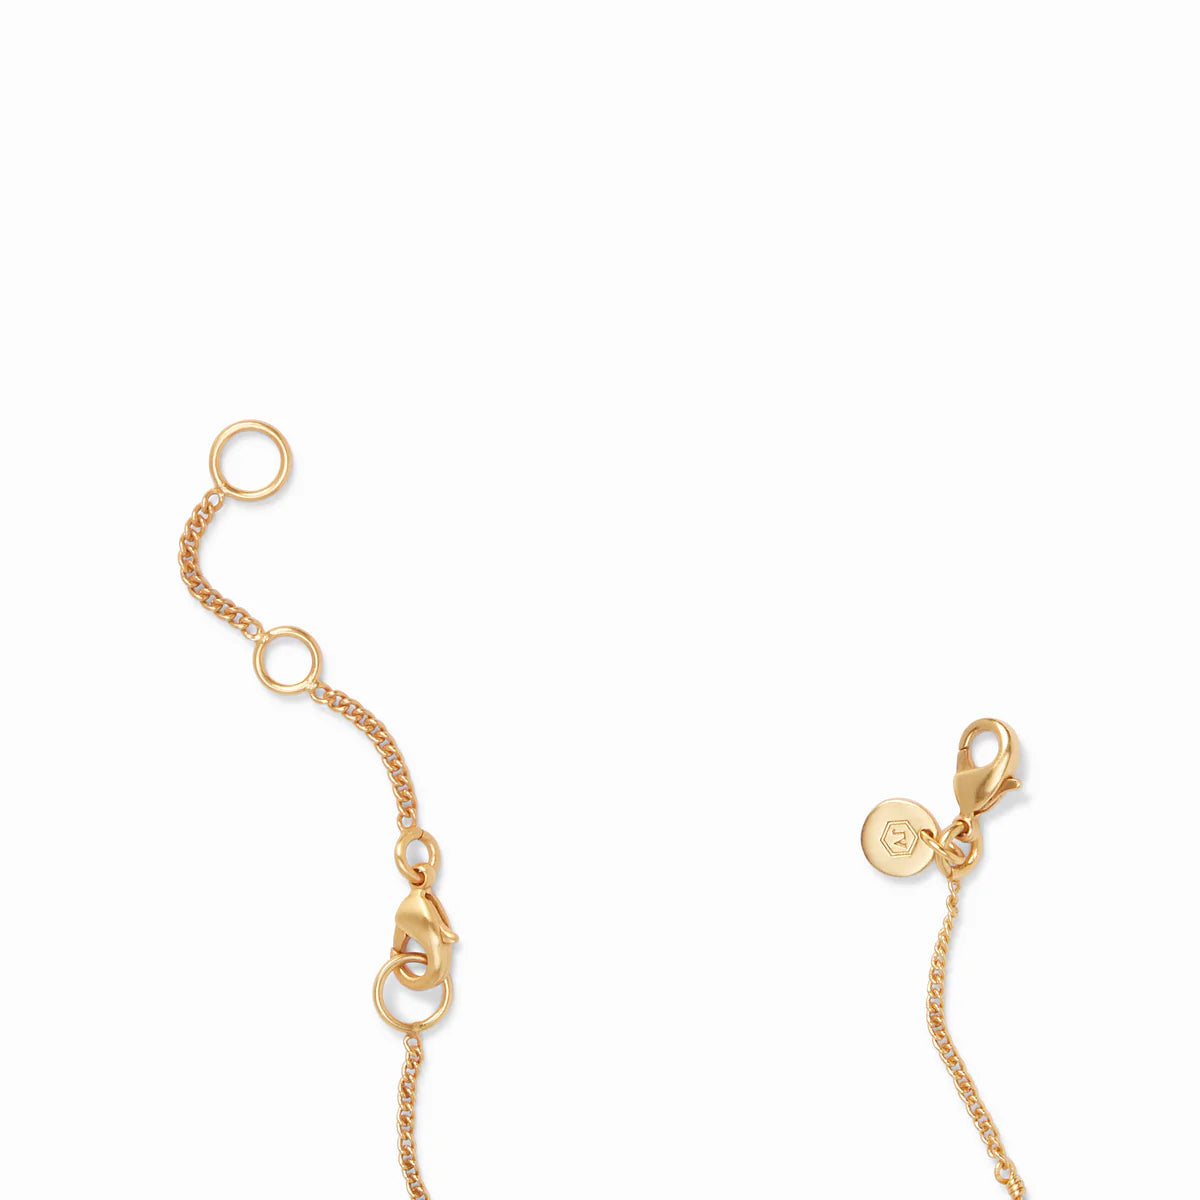 Delicate Extender Set Gold by Julie Vos, 1-2 inch extender for delicate necklaces and bracelets in 24K gold plate. Shop at The Painted Cottage in Edgewater, MD